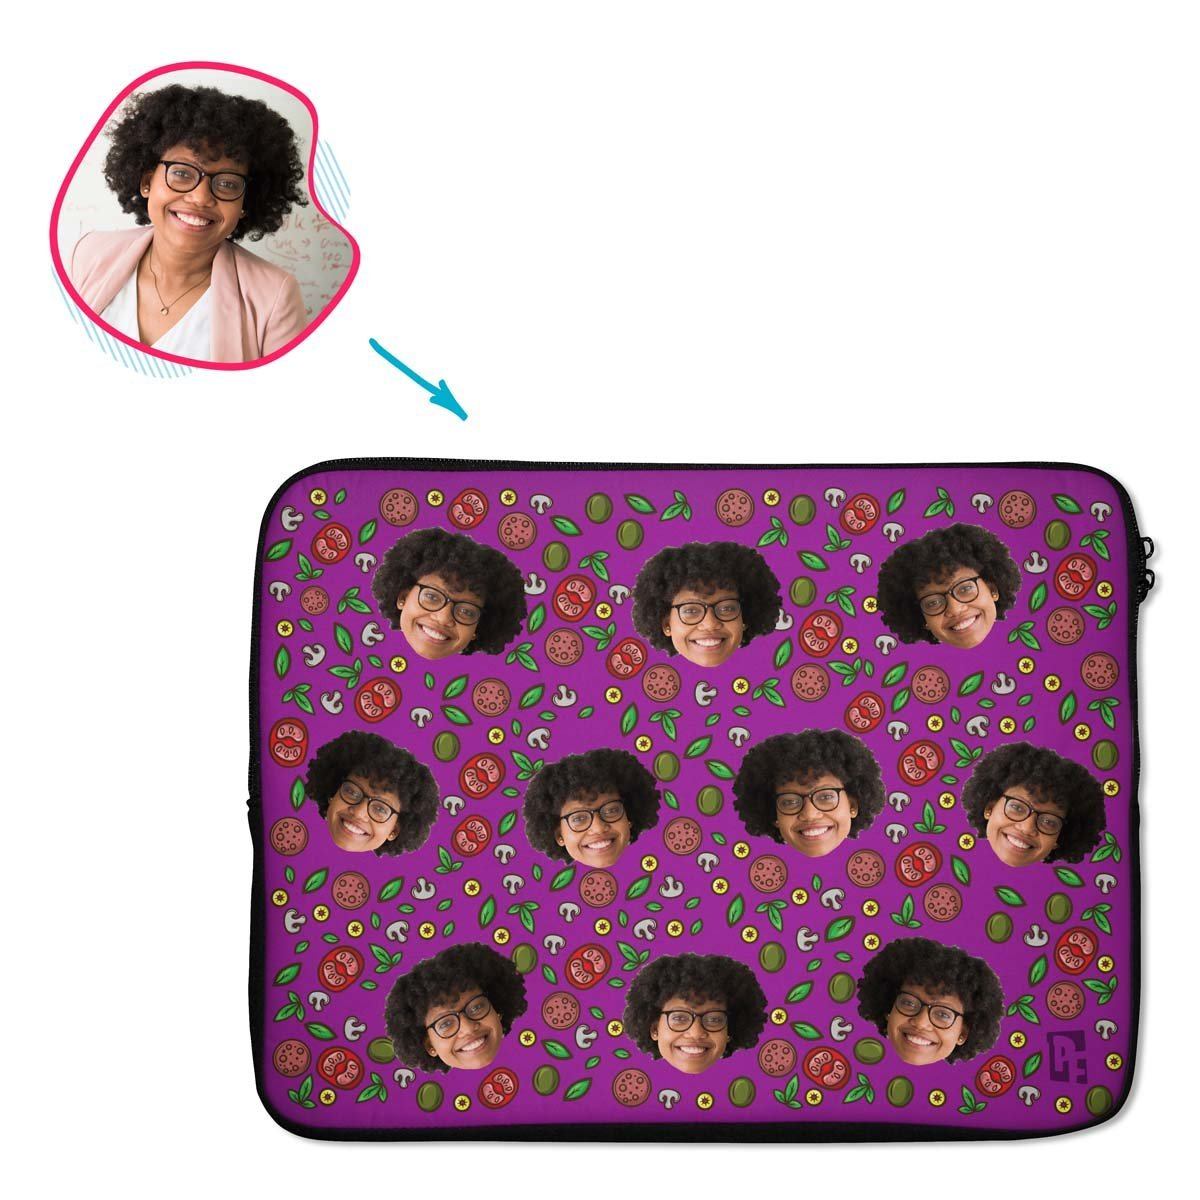 purple Pizza laptop sleeve personalized with photo of face printed on them